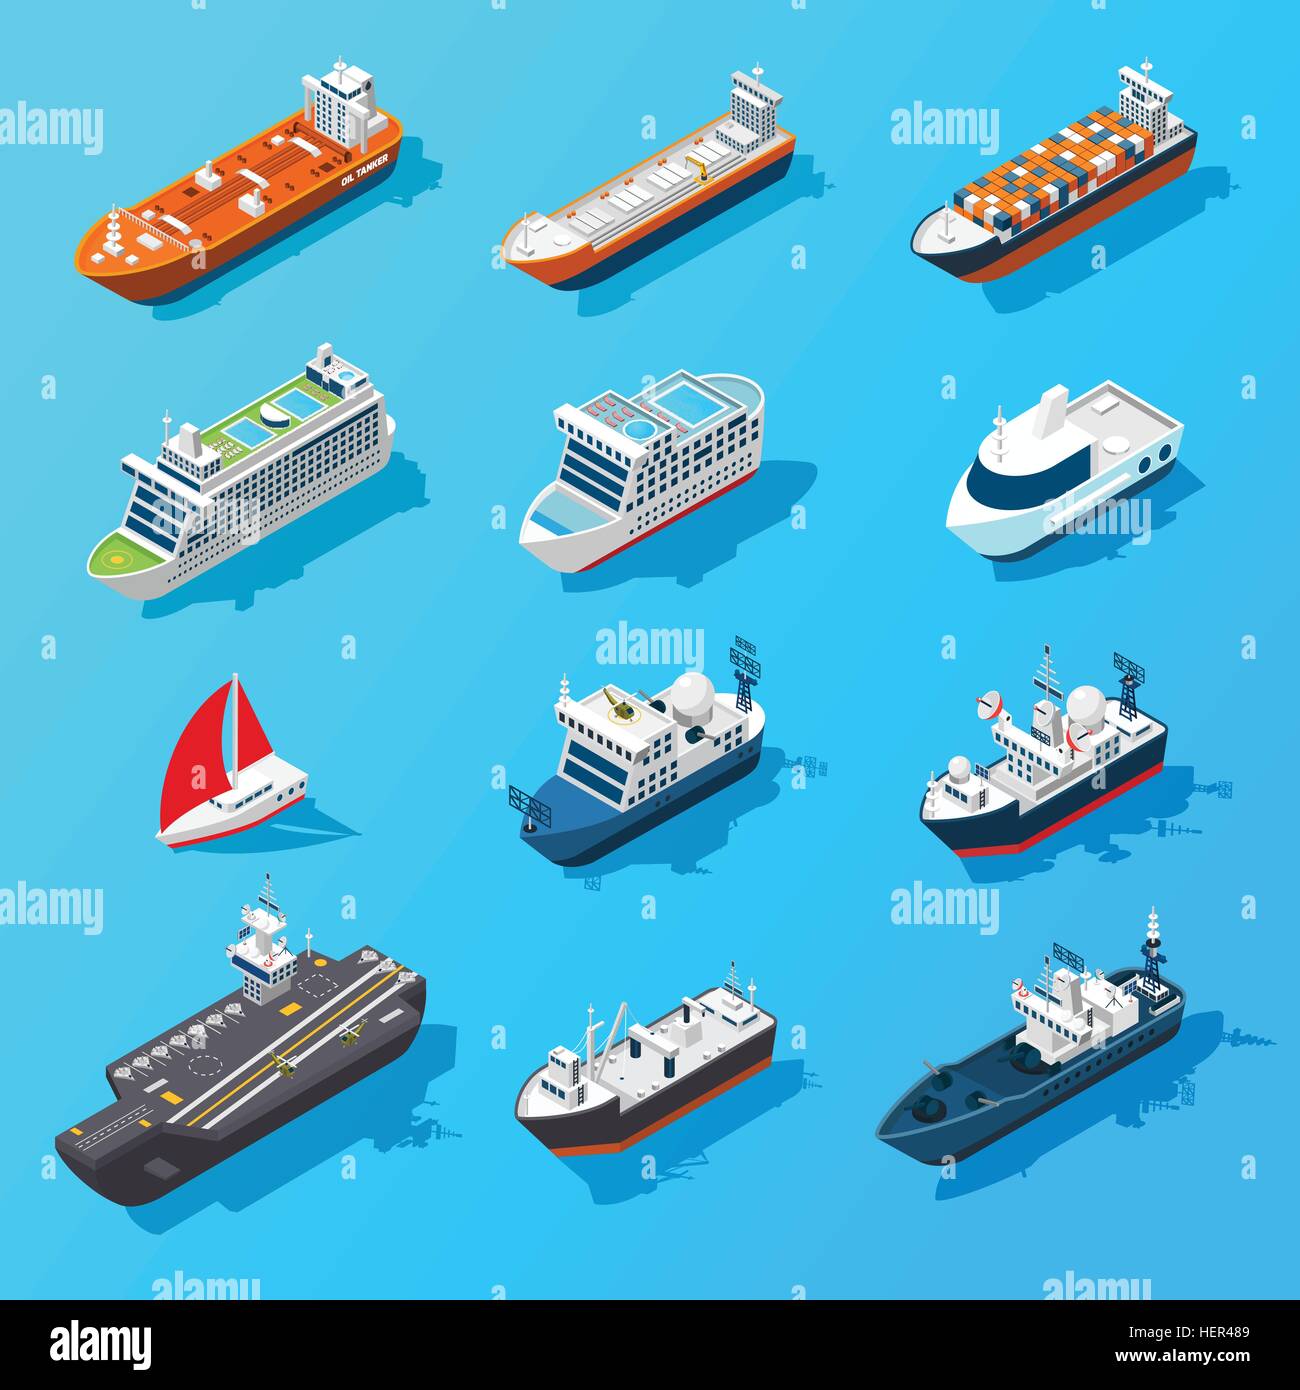 Ships Boats Vessels Isometric Icon Set . Ships motorboats sailing yachts and passenger vessels isometric icons set on water Stock Vector